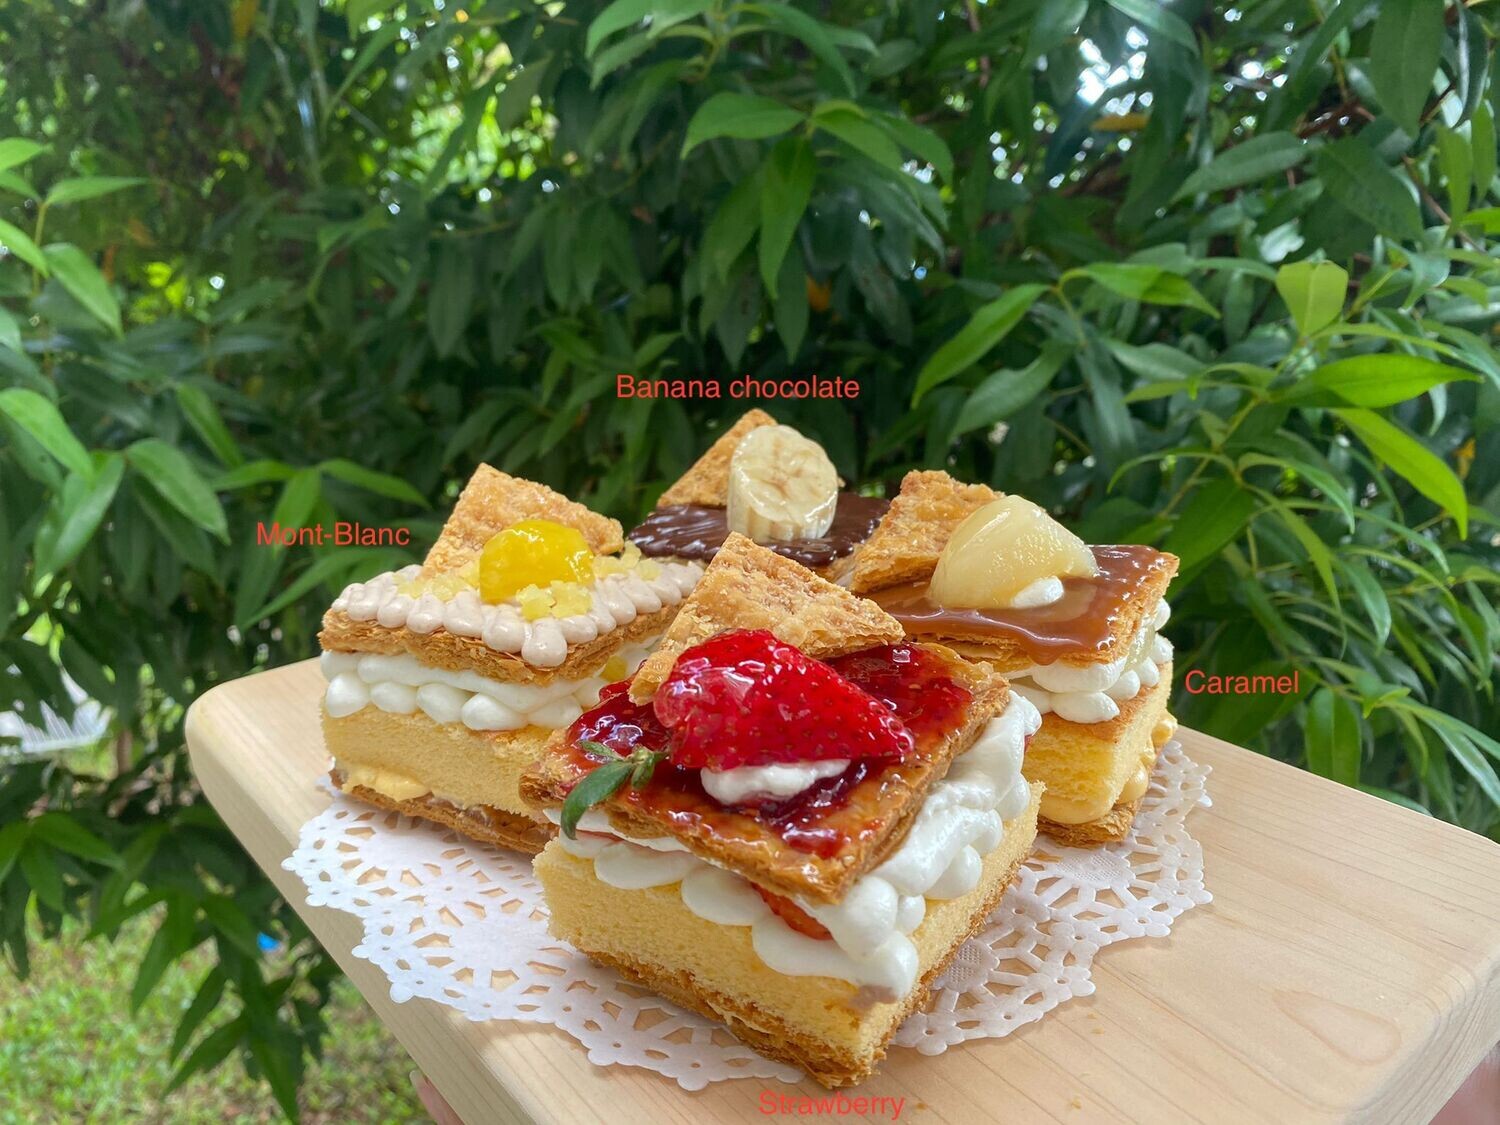 Mille-Feuille on Parade